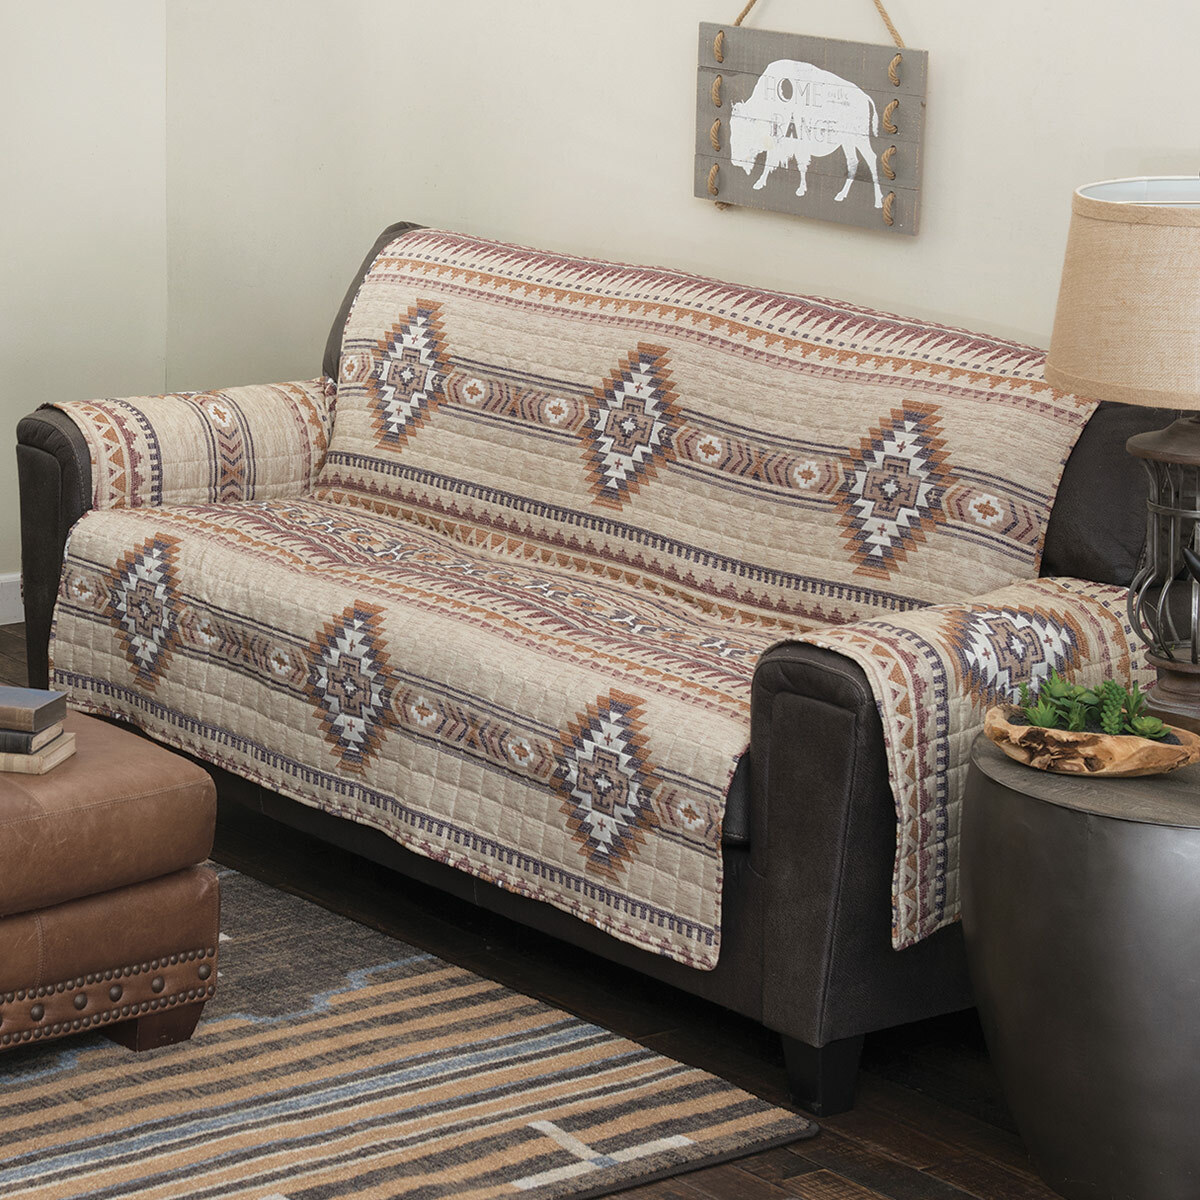 Southern Flare Sofa Cover | Lone Star Western Decor